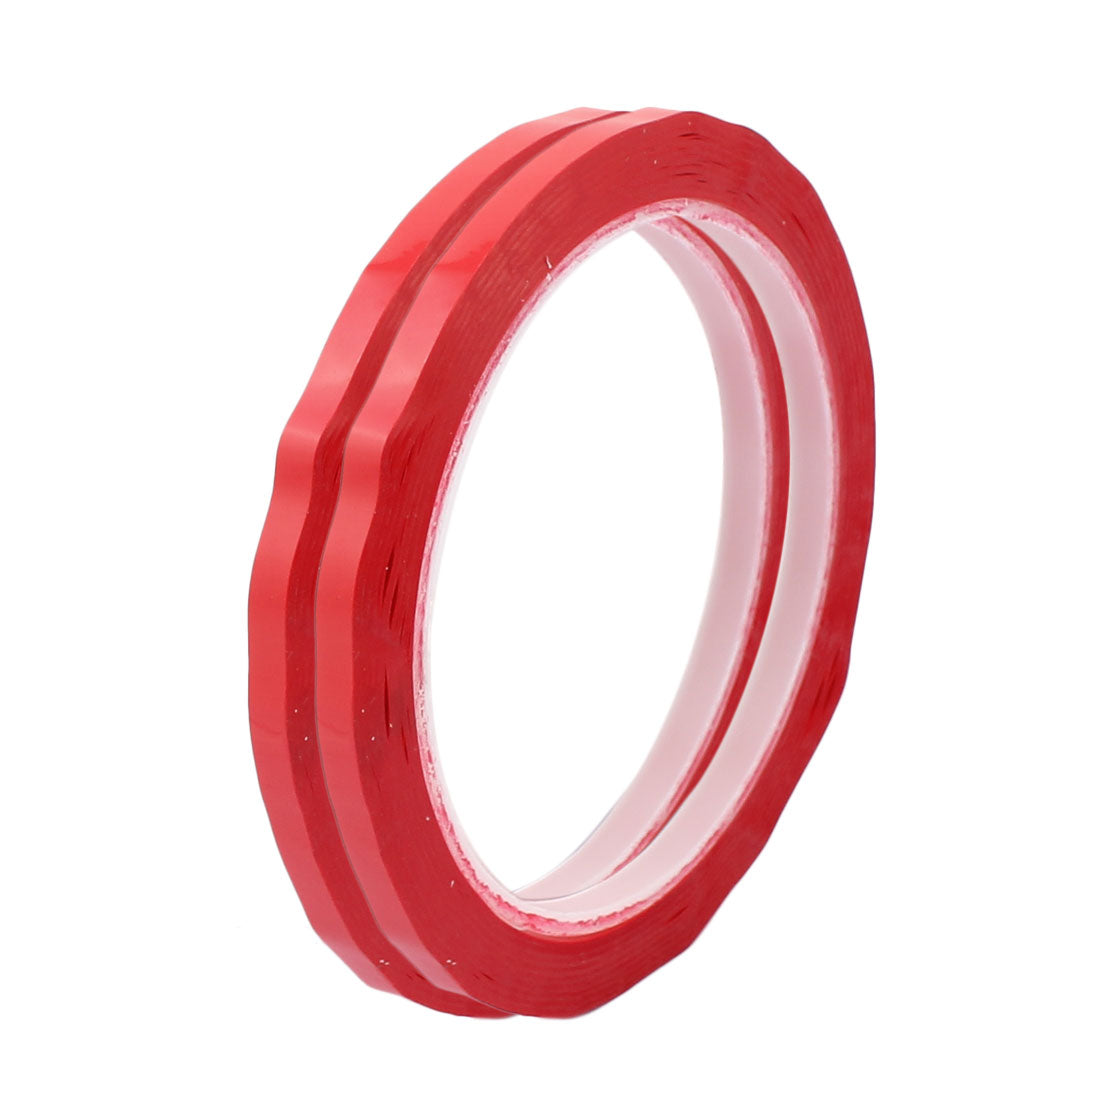 uxcell Uxcell 2Pcs 5mm Single Sided Strong Self Adhesive Mylar Tape 50M Length Red